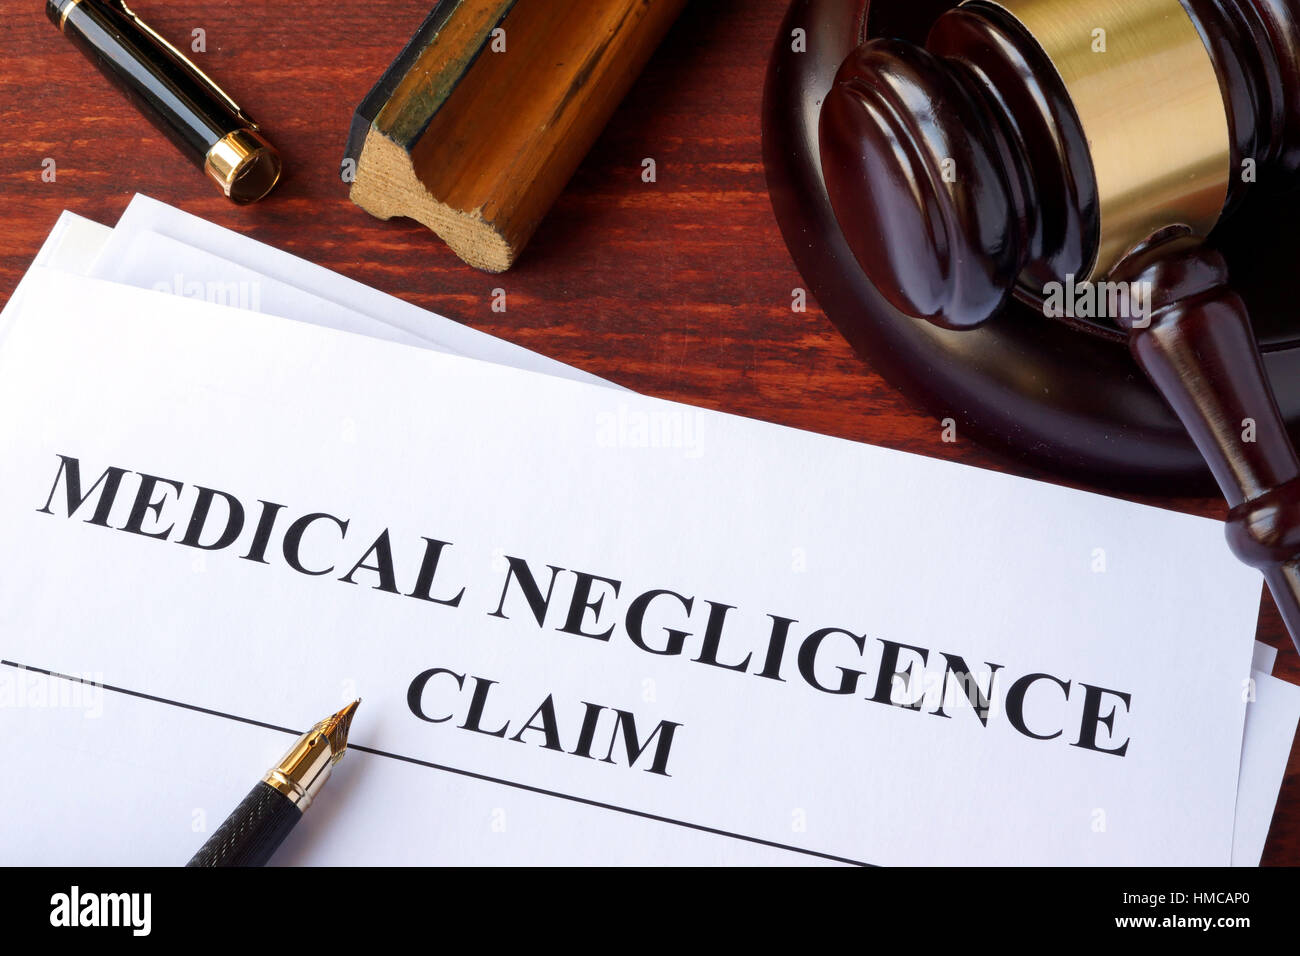 Medical Negligence claim  and gavel on a table. Stock Photo